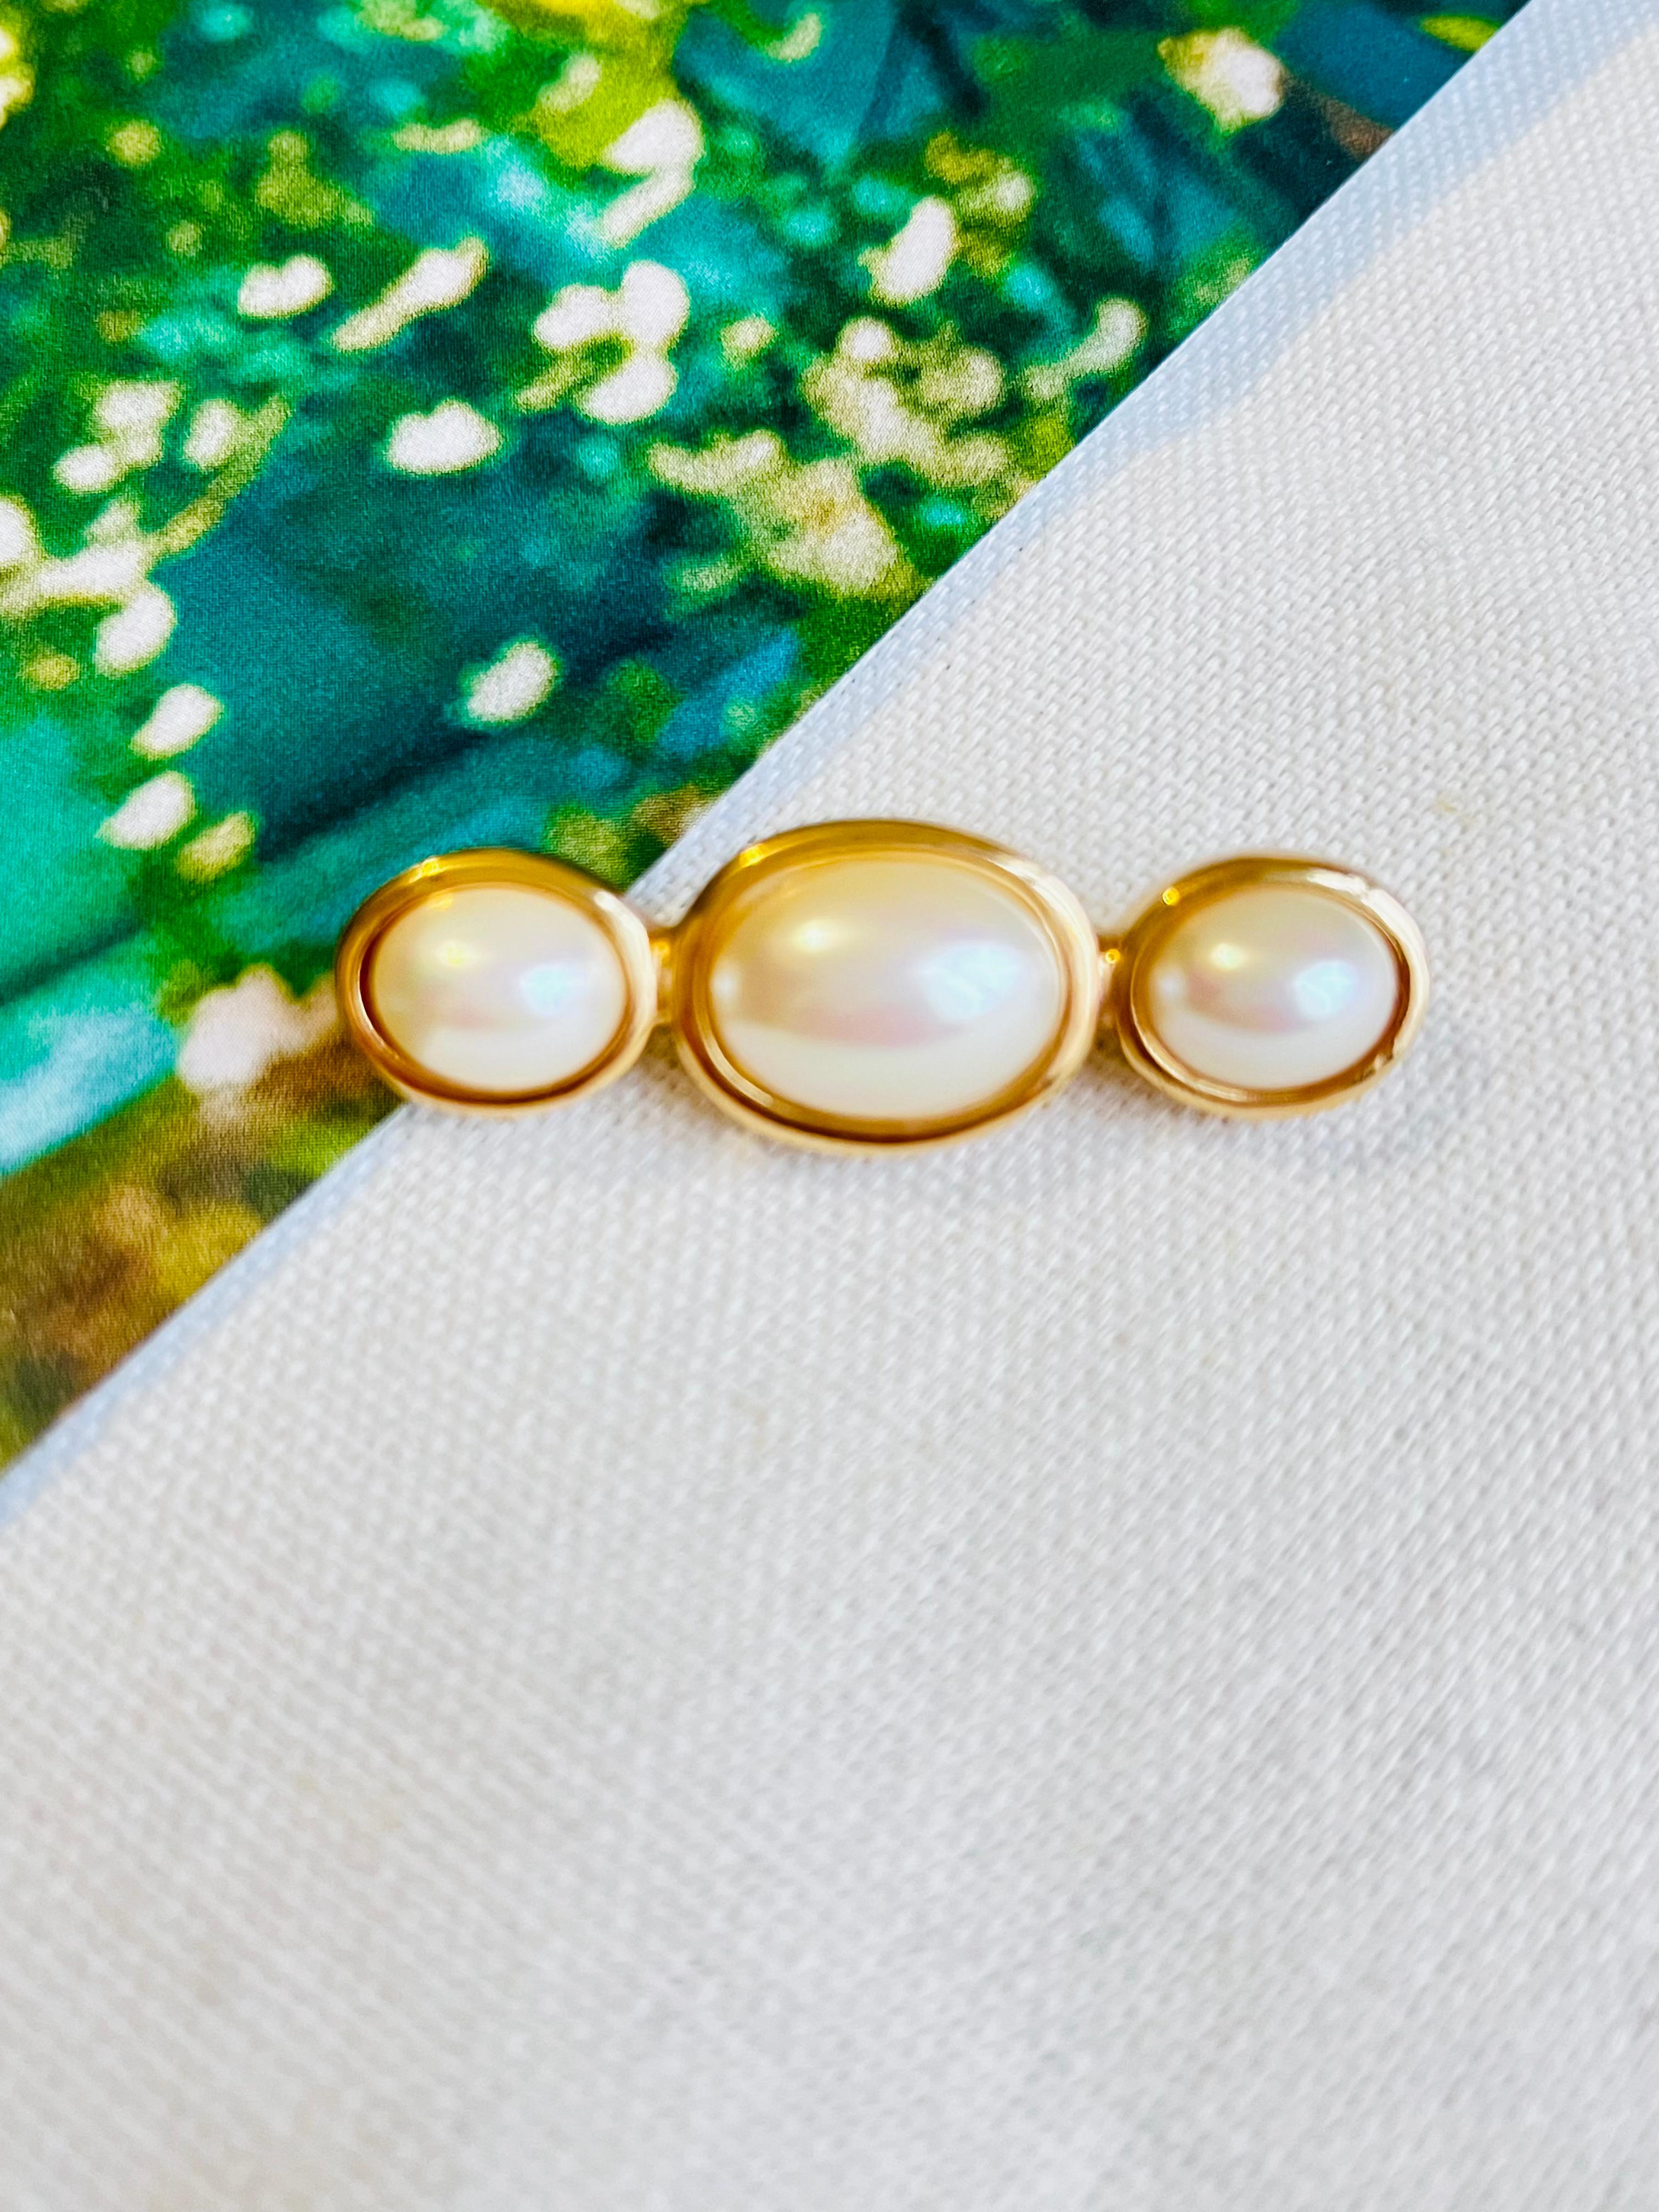 Very good condition. All perfect but one tiny mark on one faux pearl. Barely noticeable.  100% Genuine.

A unique piece. This gold plated stylised brooch with three gorgeous faux pearls. 

Safety-catch pin closure, signed Christian Dior on the